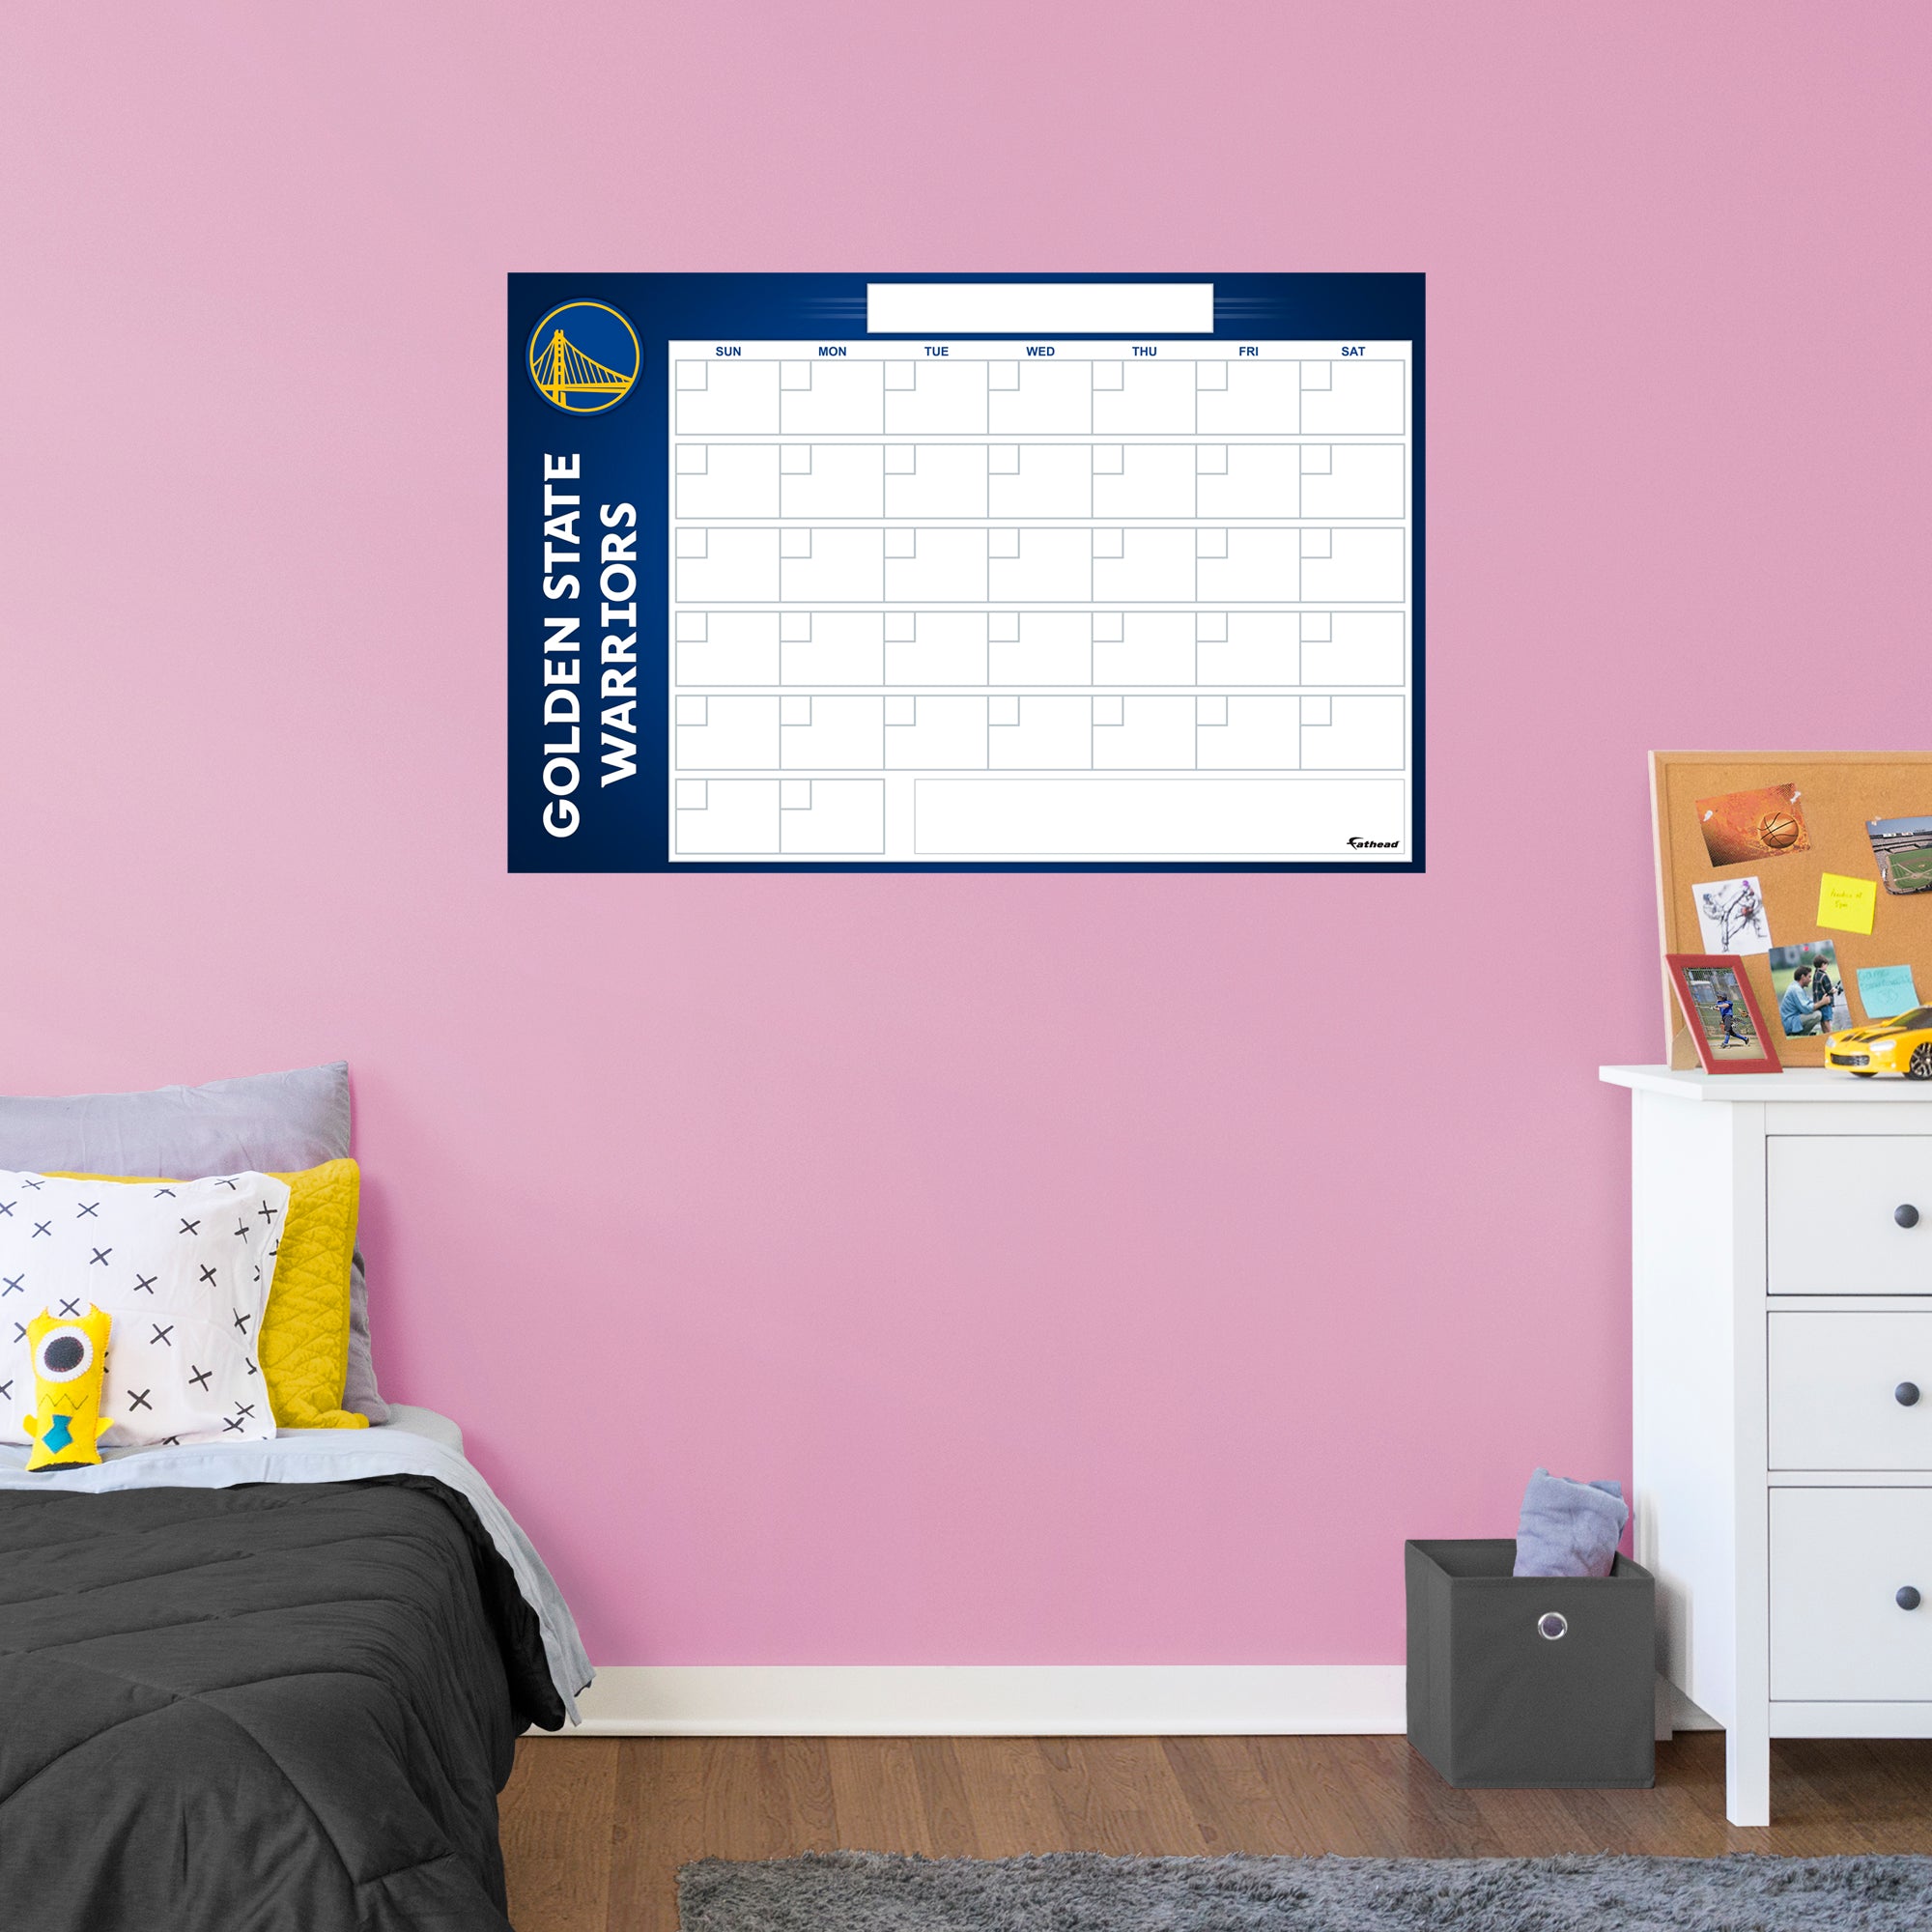 Golden State Warriors Dry Erase Calendar - Officially Licensed NBA Removable Wall Decal Giant Decal (34"W x 52"H) by Fathead | V